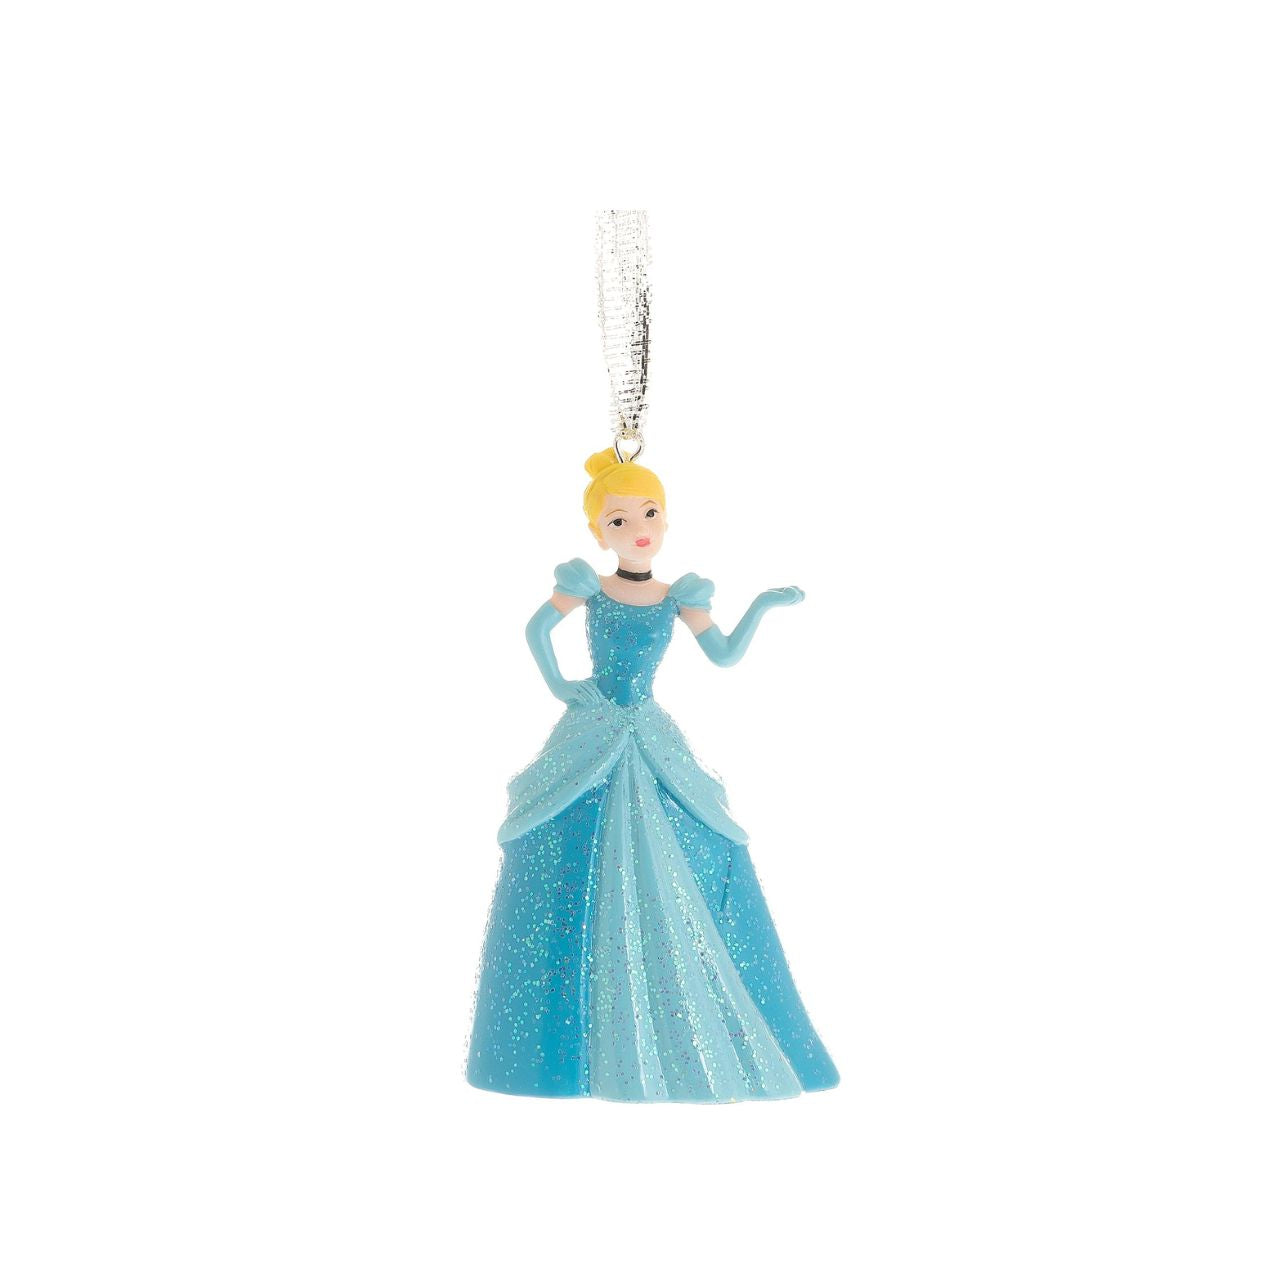 Disney Set of 4 Princess Resin Hanging Decorations  Bring some Disney magic to any tree this year with this glittering set of Princess hanging decorations. Perfect for Disney fans young and old, these beautiful figurines are sure to brighten up any home.